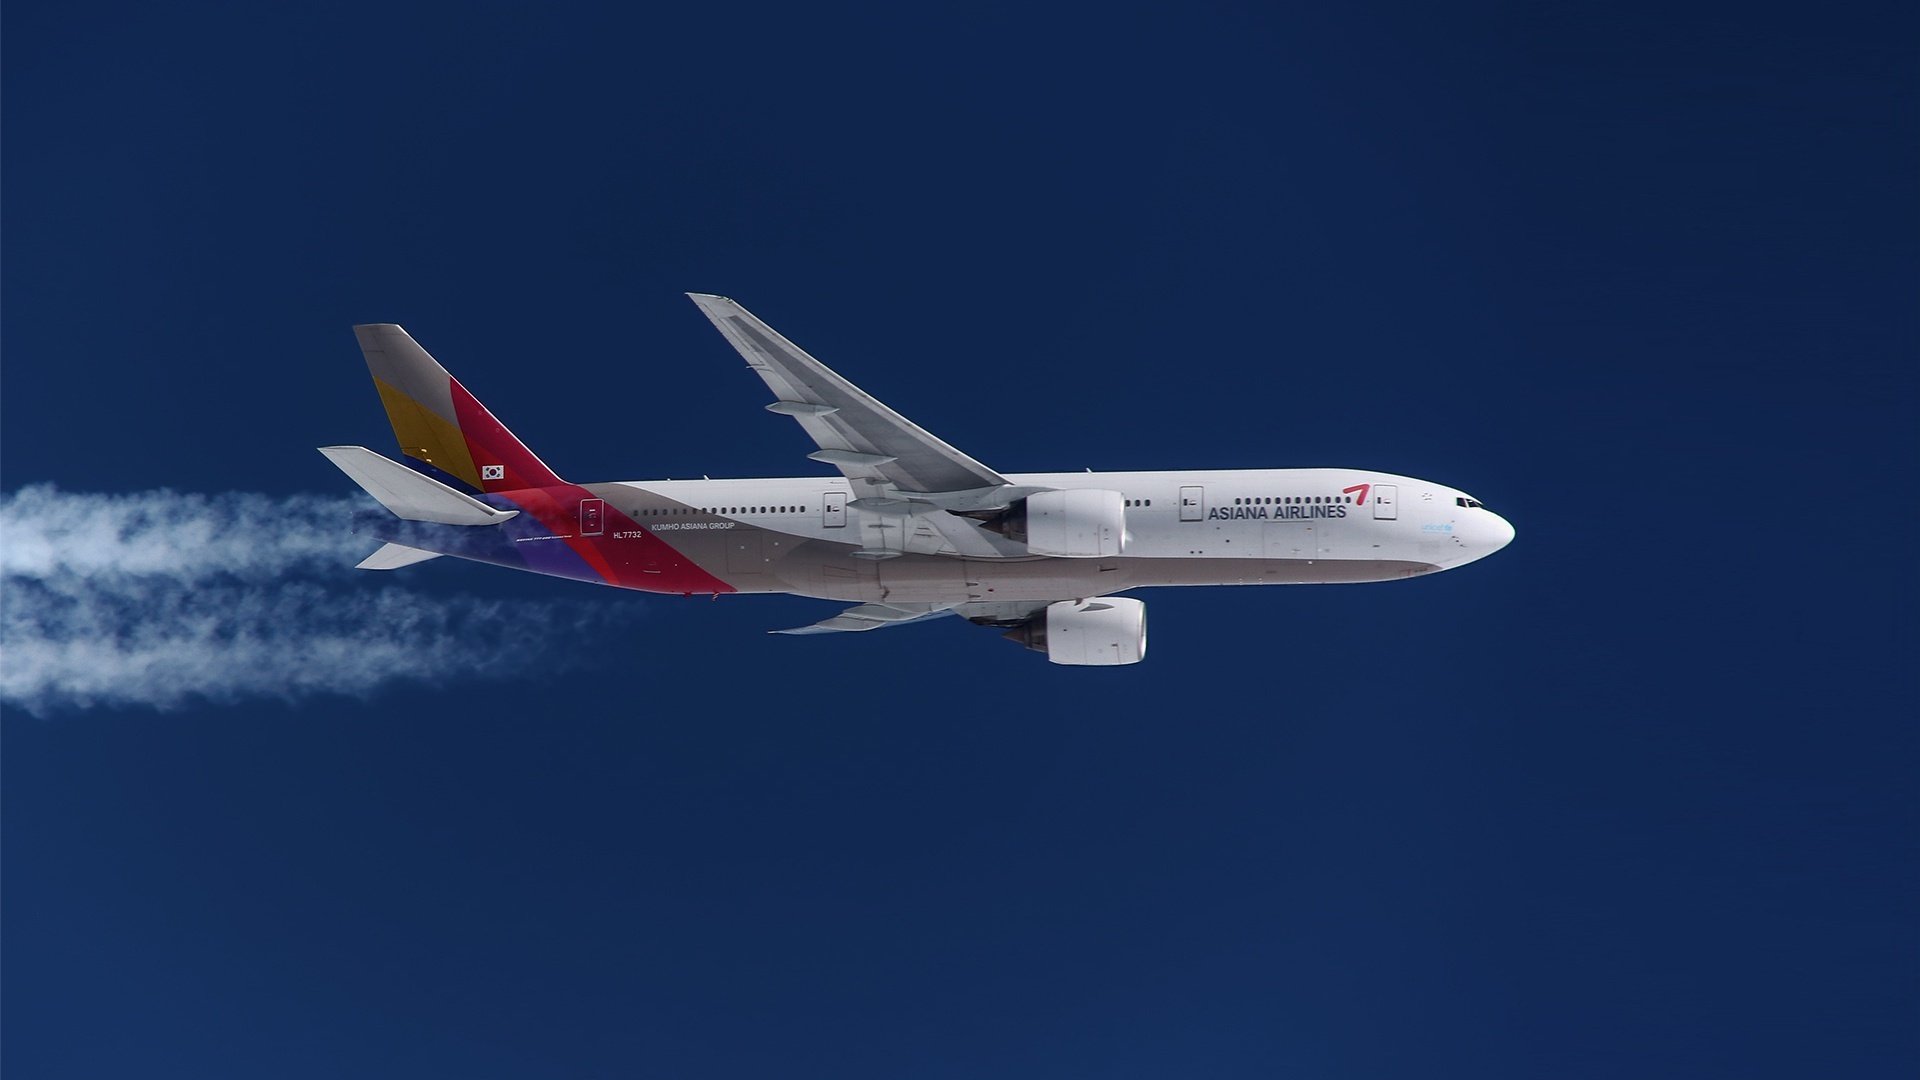 Asiana Airlines, Boeing 777, HD wallpaper, Background image, 1920x1080 Full HD Desktop